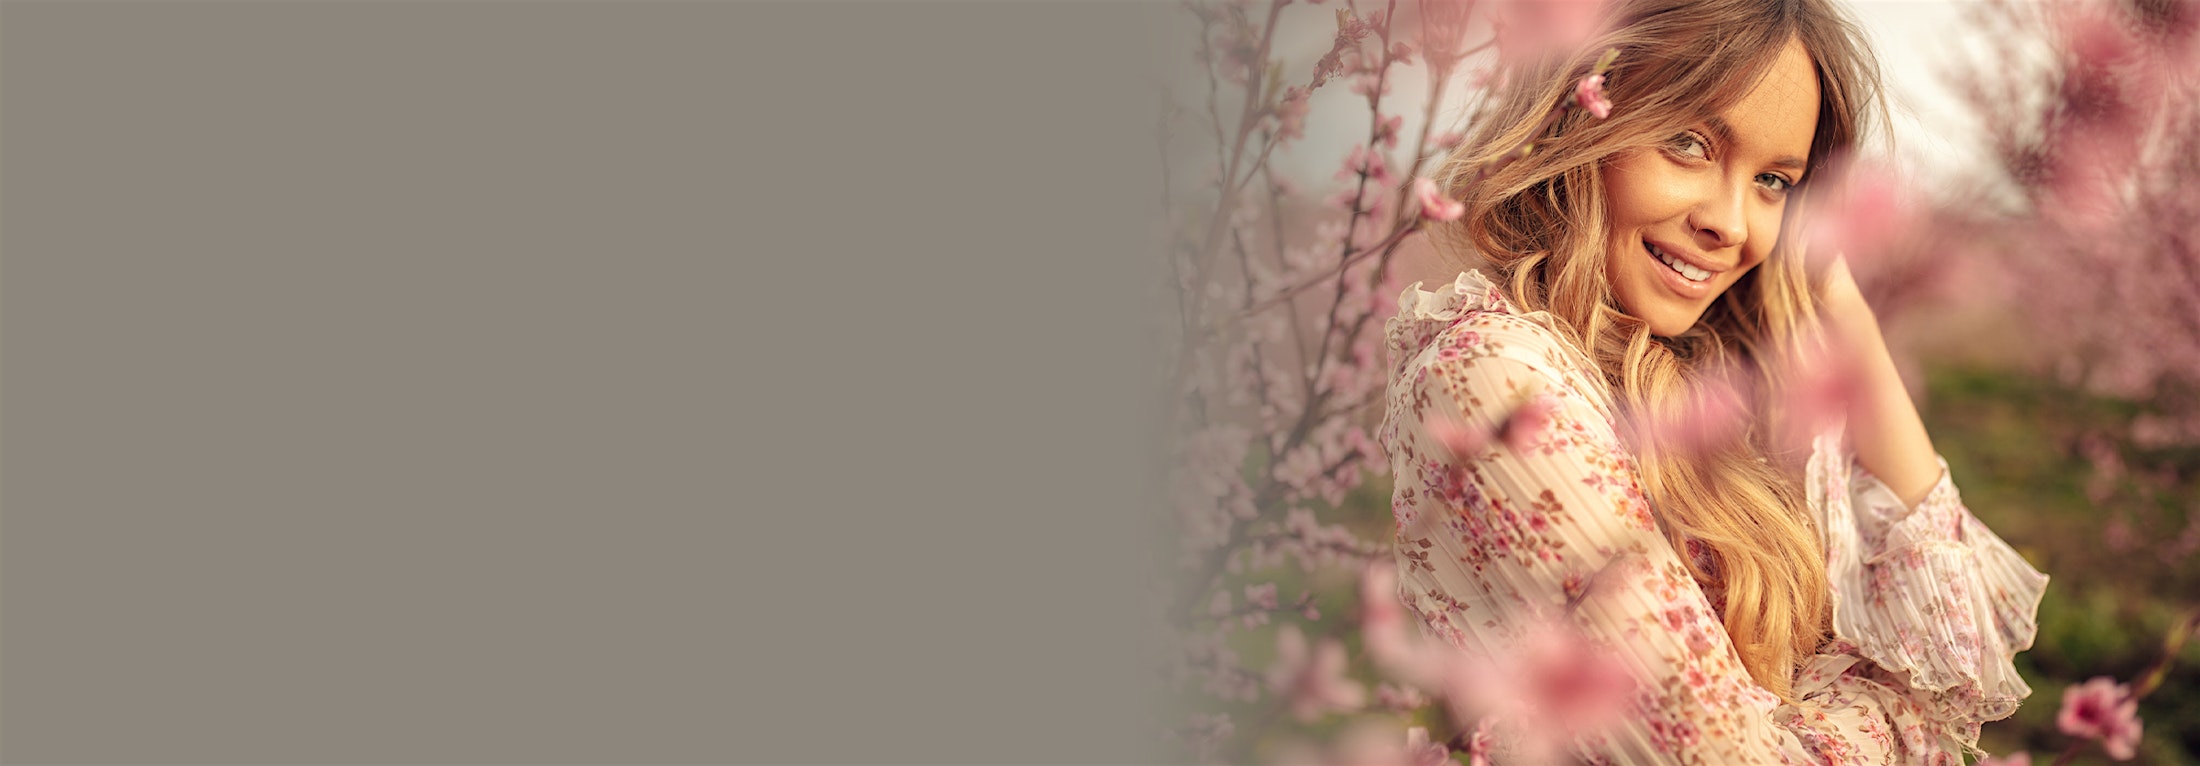 woman surrounded by pink flowers